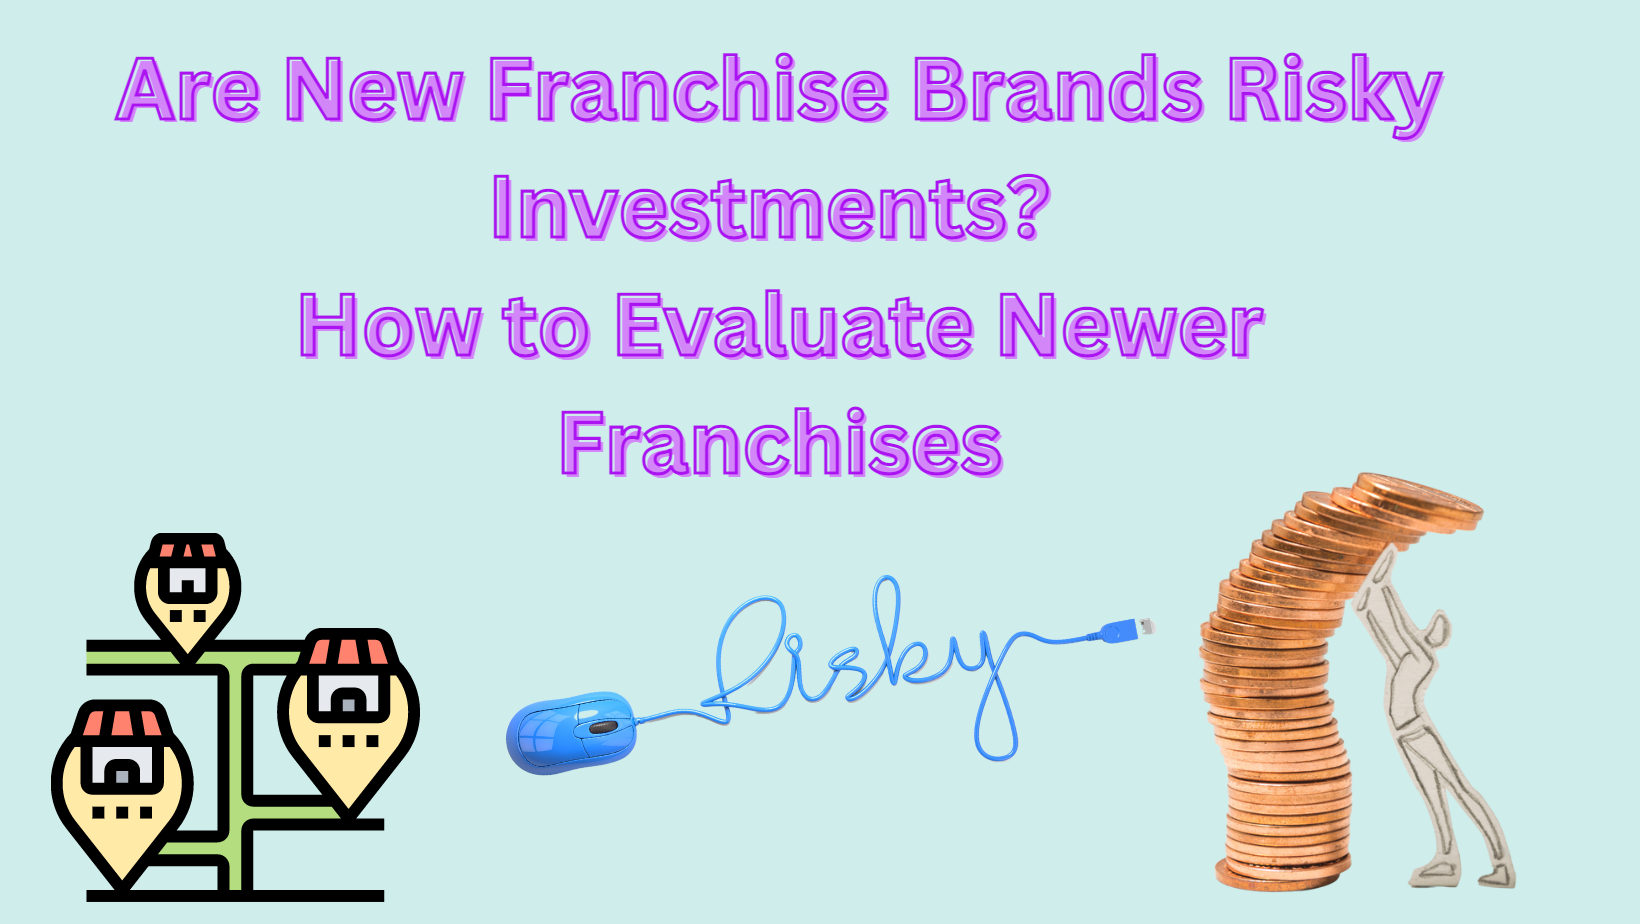 Are New Franchise Brands Risky Investments? How to Evaluate Newer Franchises